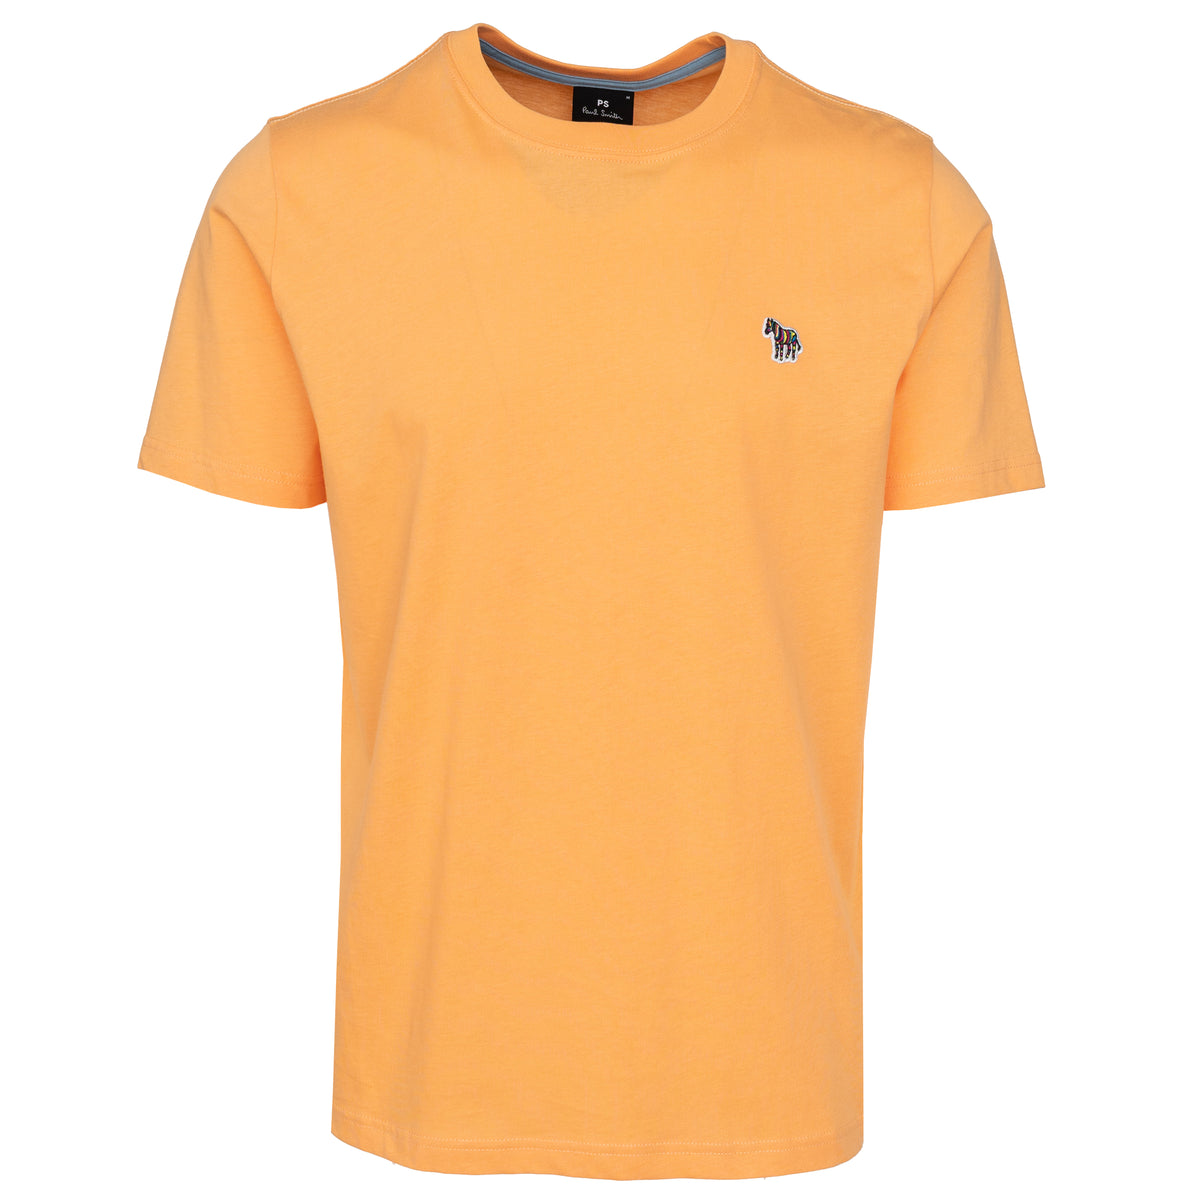 Load image into Gallery viewer, Paul Smith Orange Regular Fit Zebra Patch Tee
